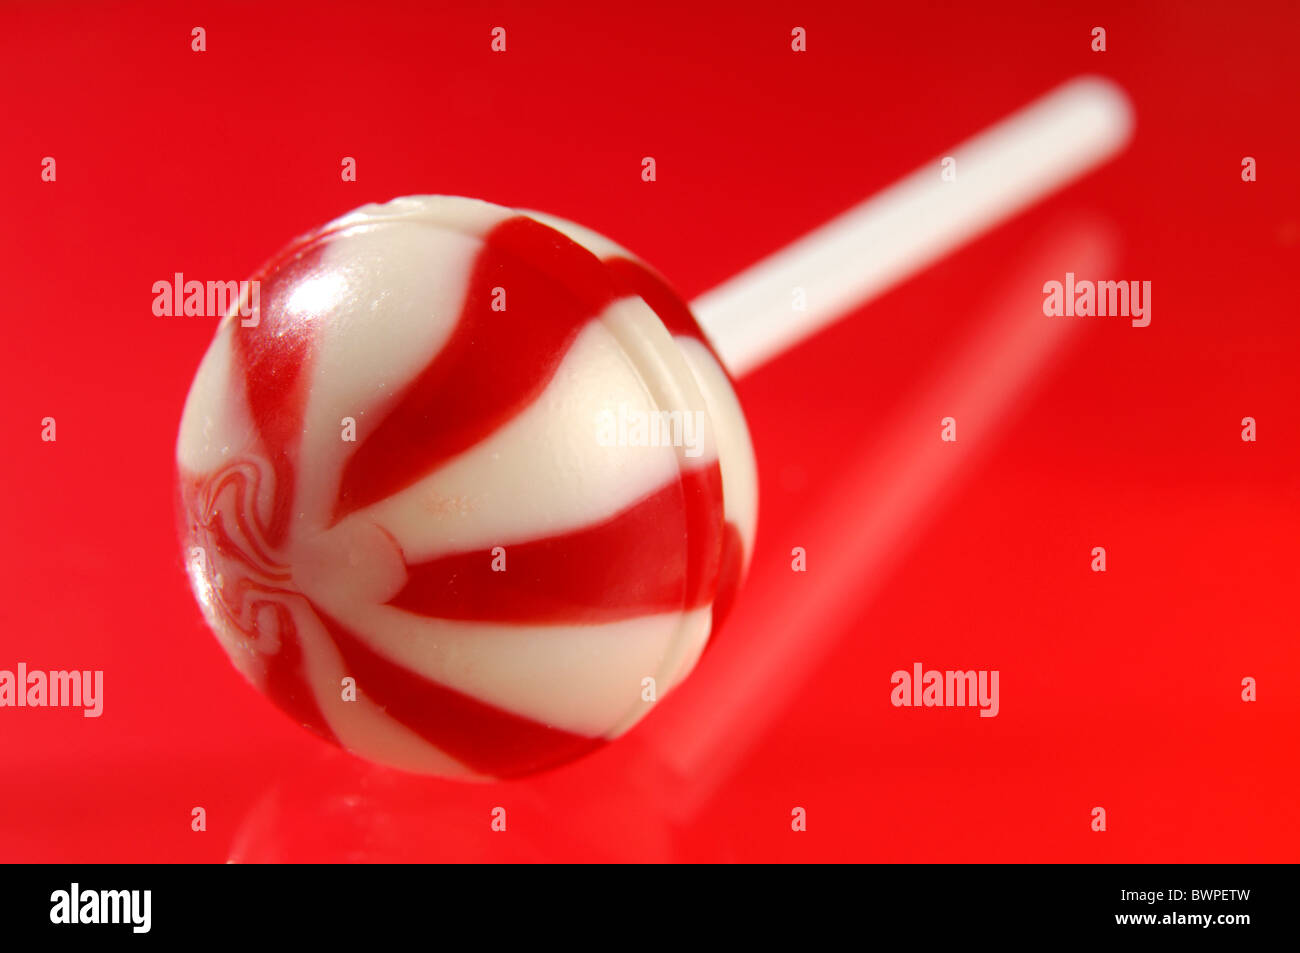 Colorful red white stripy lollipop isolated on red background Stock Photo